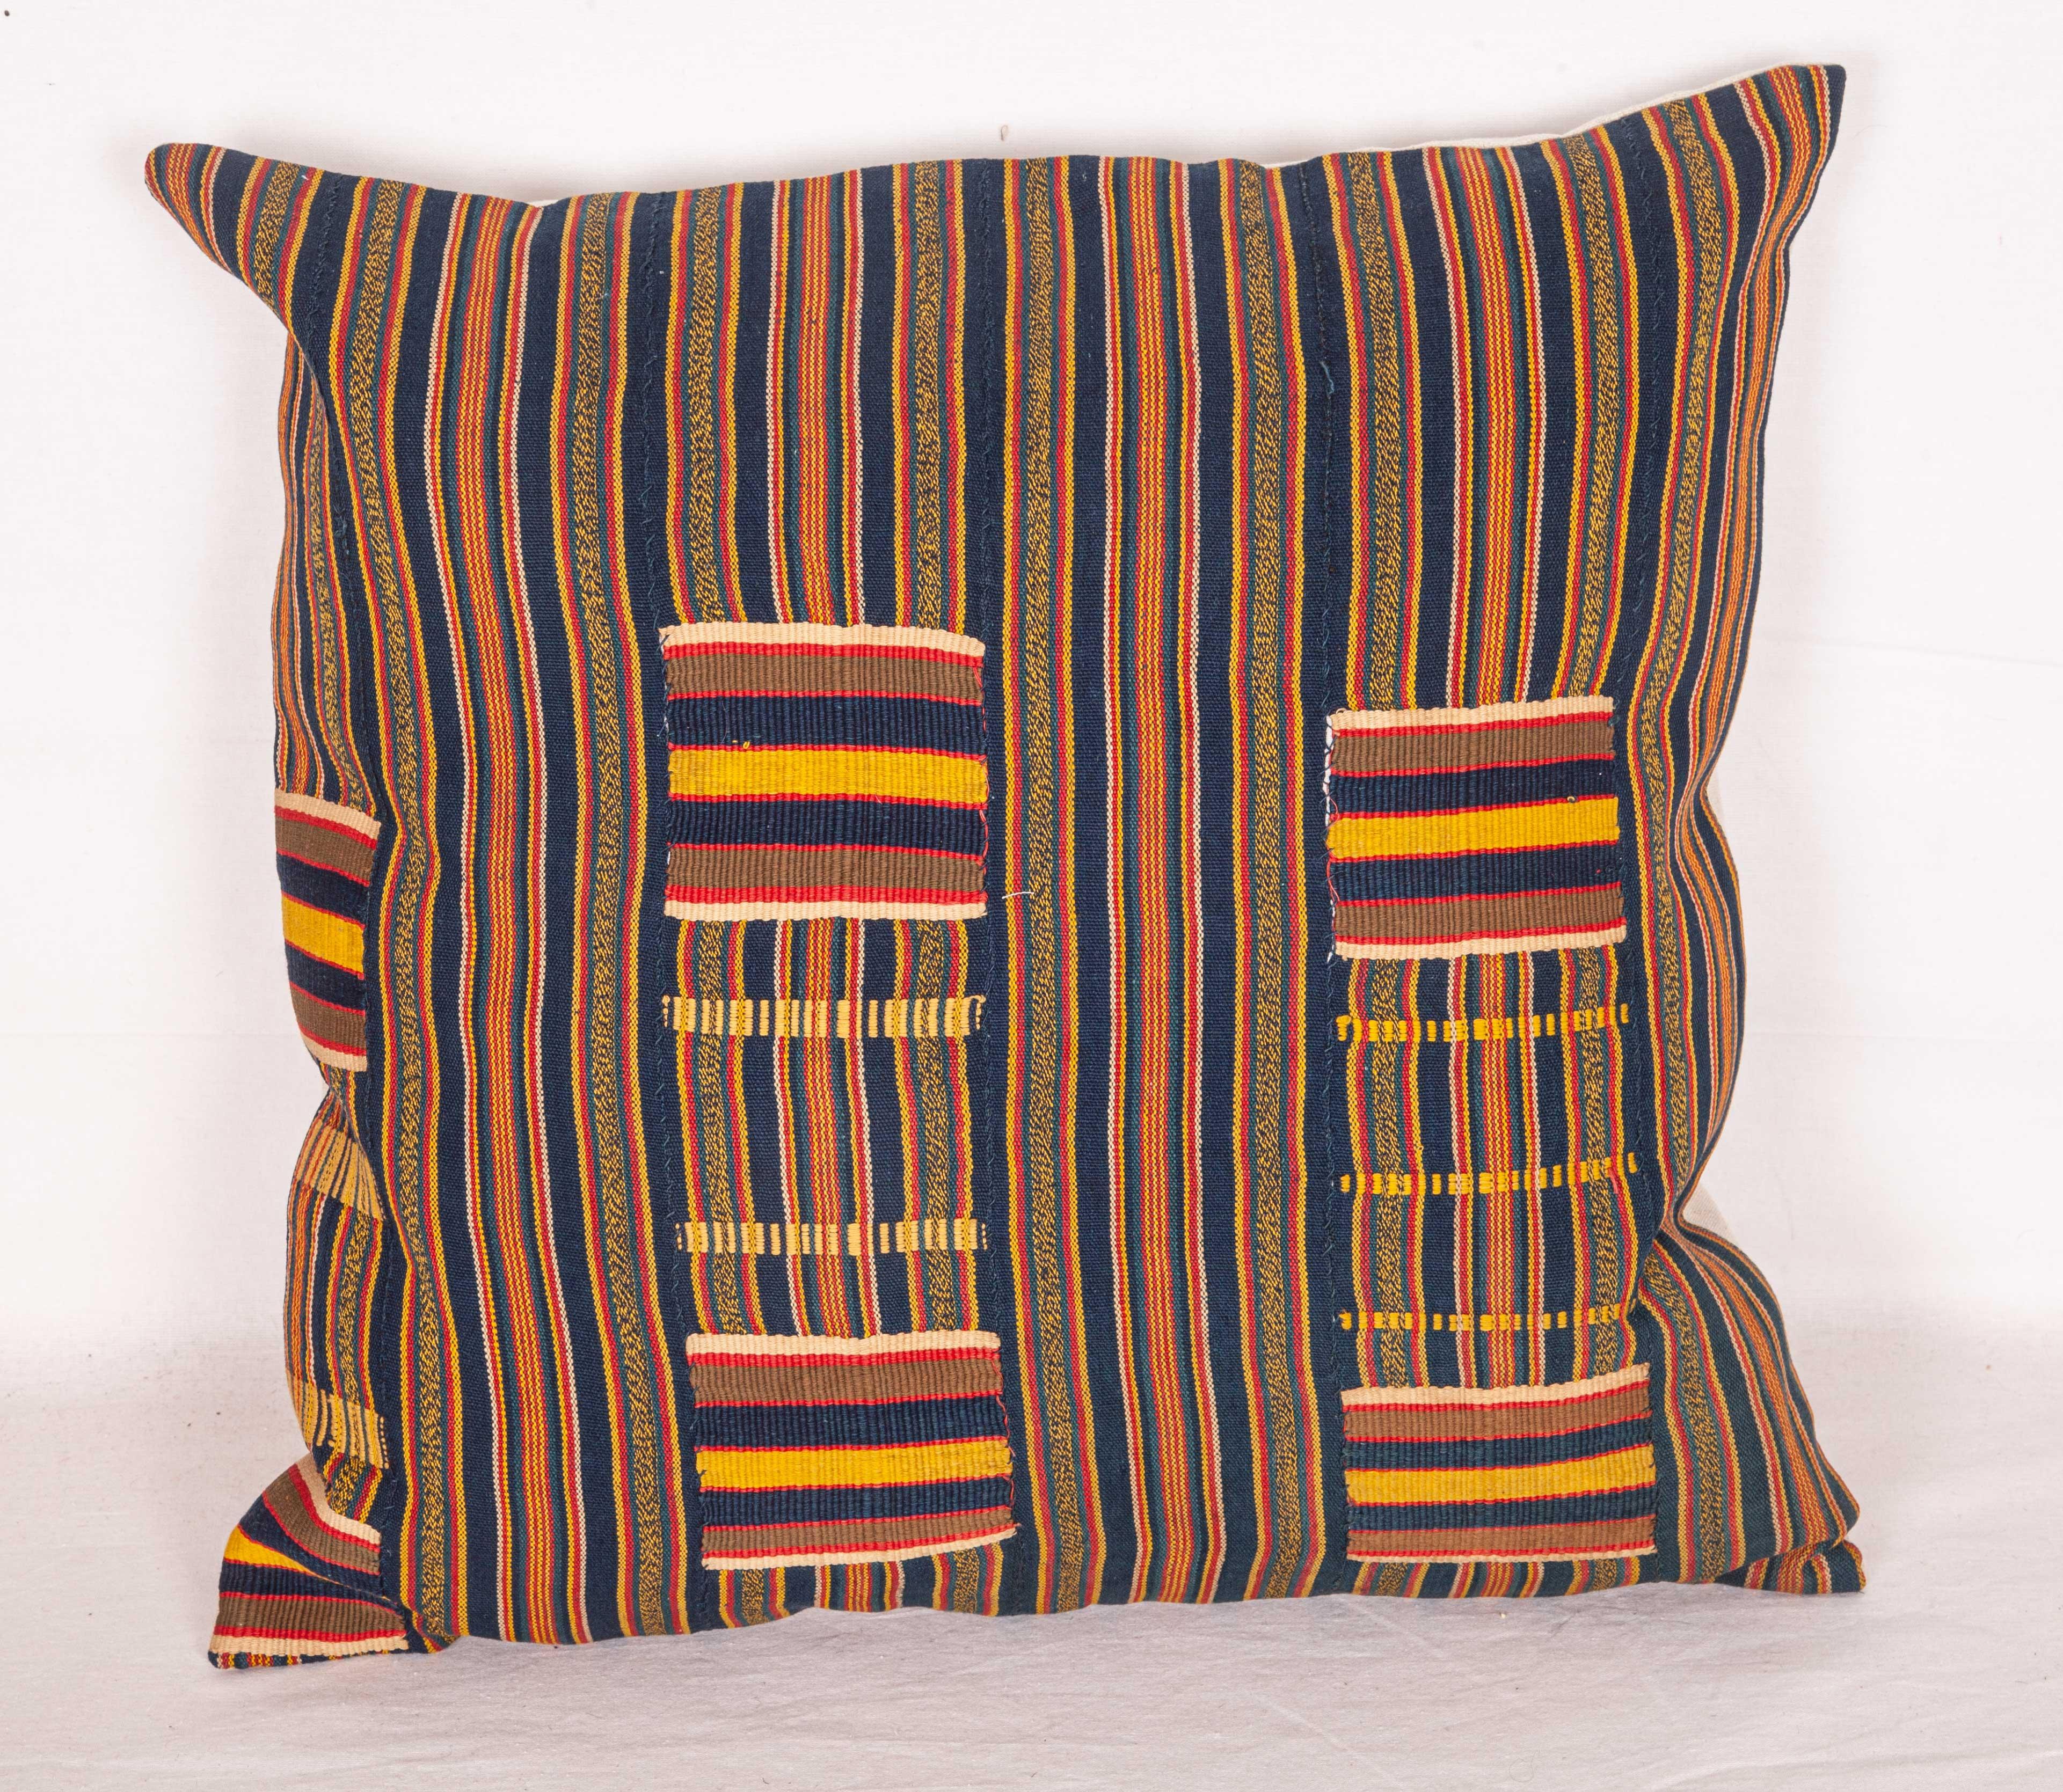 Ghanaian Pillow Cases Fashioned from African Kente Cloth, First Half of the 20th Century